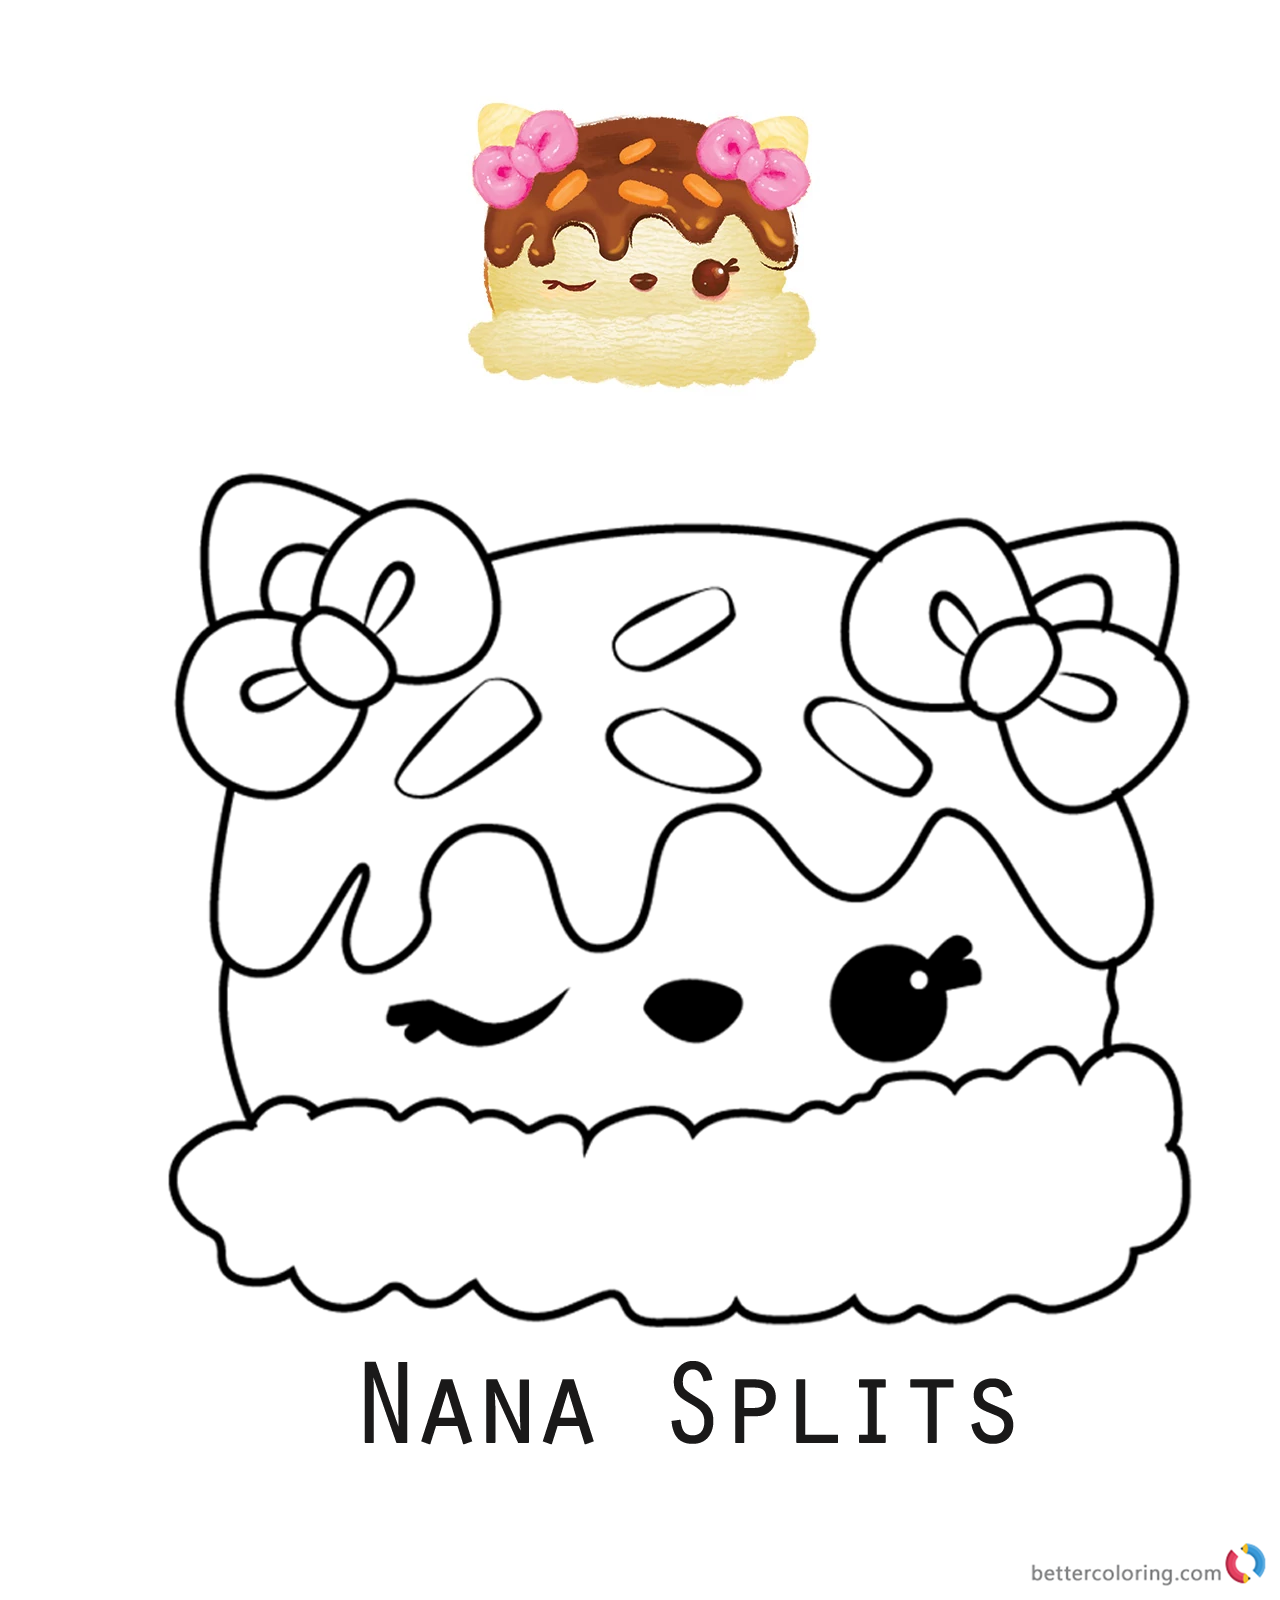 Nana Splits from Num Noms coloring pages printable